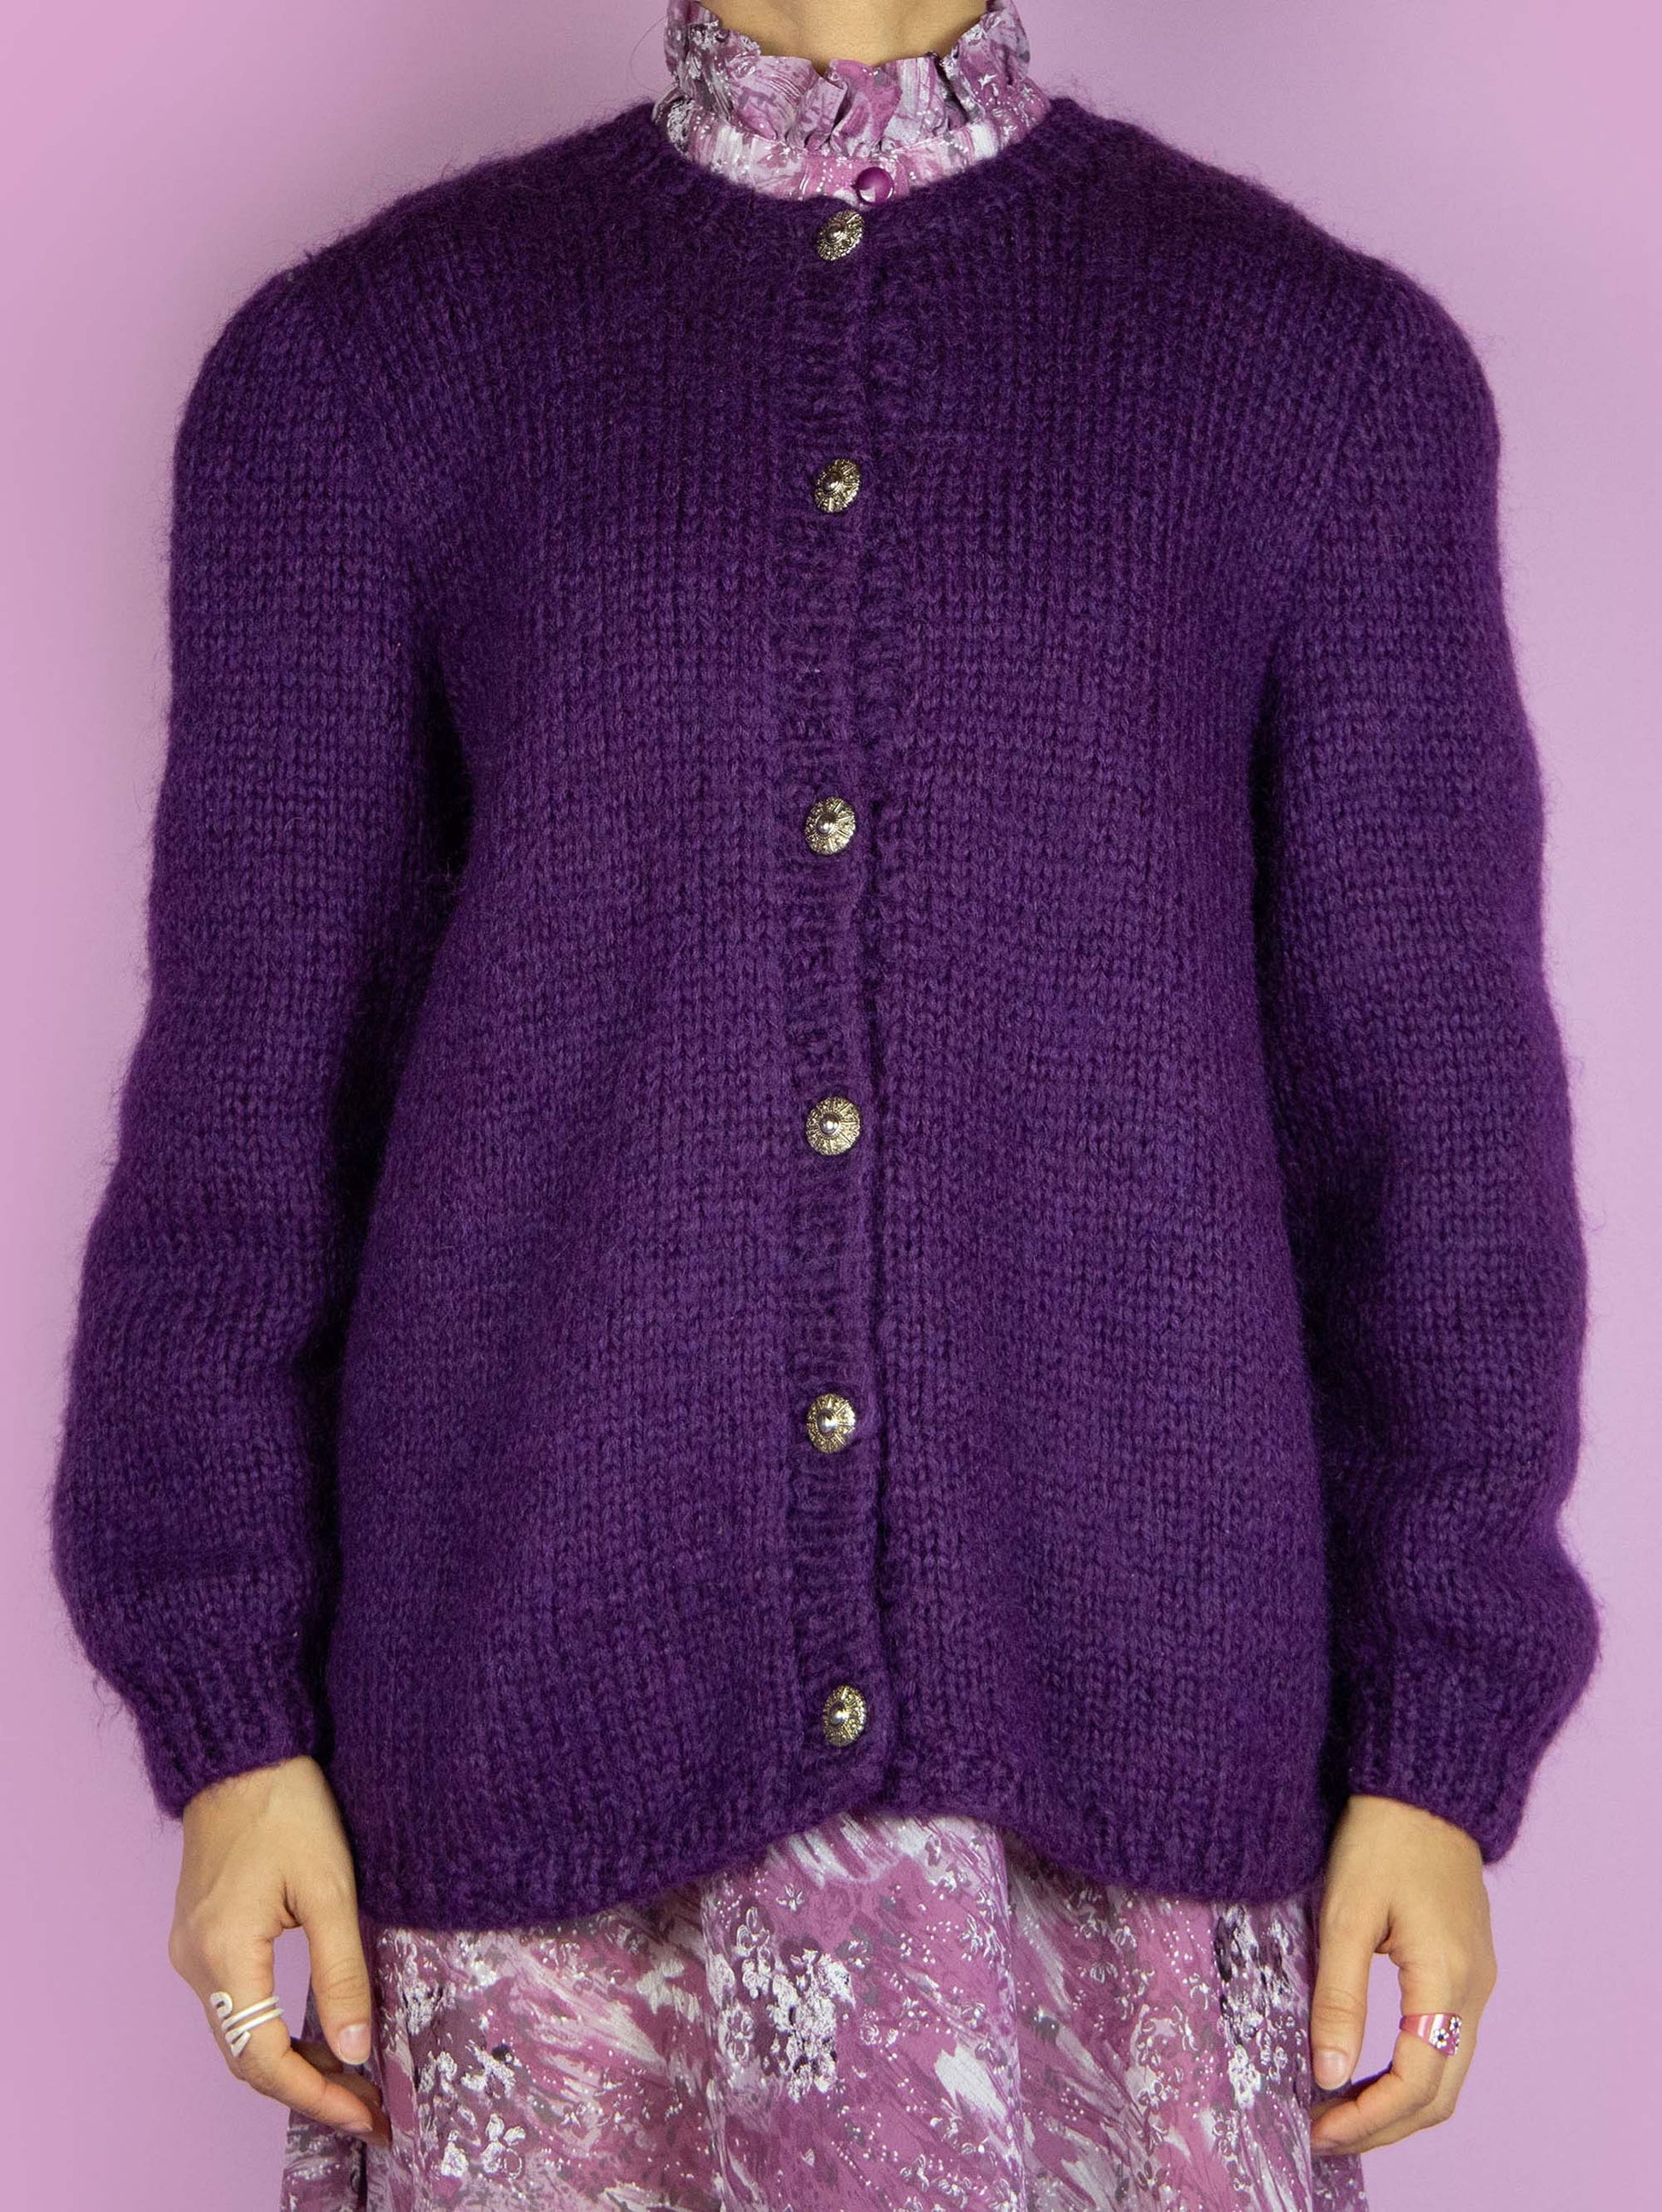 The Vintage 90s Dark Purple Knit Cardigan is a chunky knit purple cardigan with buttons. Boho retro 1990s winter knitted sweater.